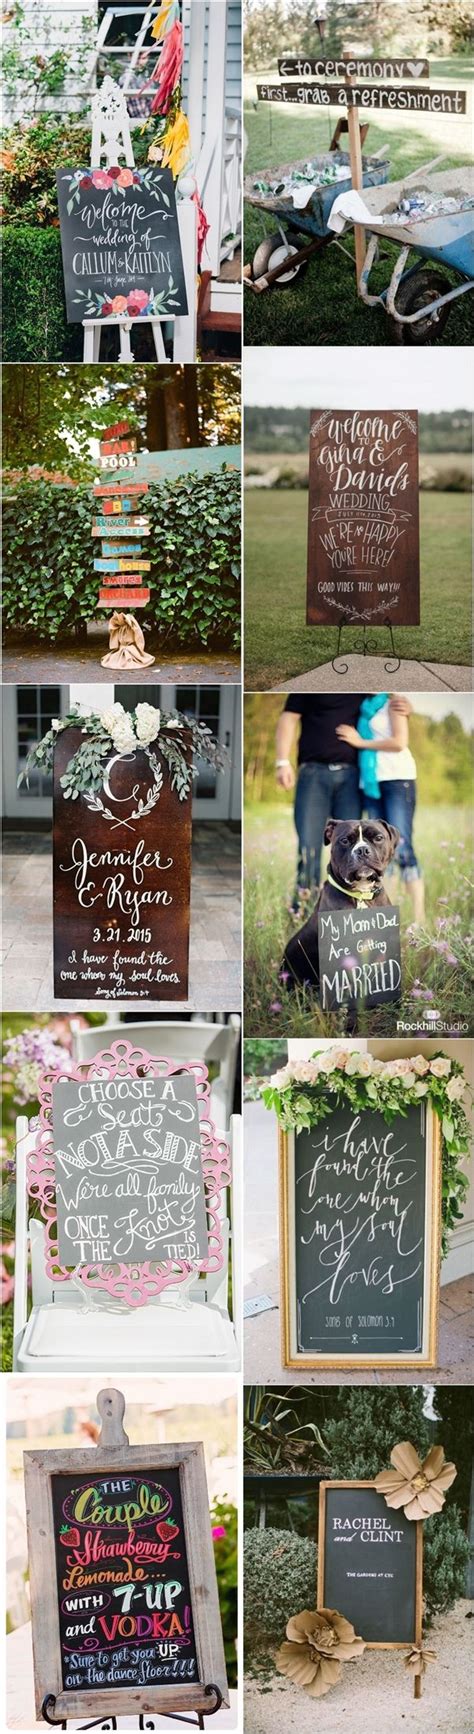 Clever Wedding Signs Your Guests Will Get A Kick Out Of